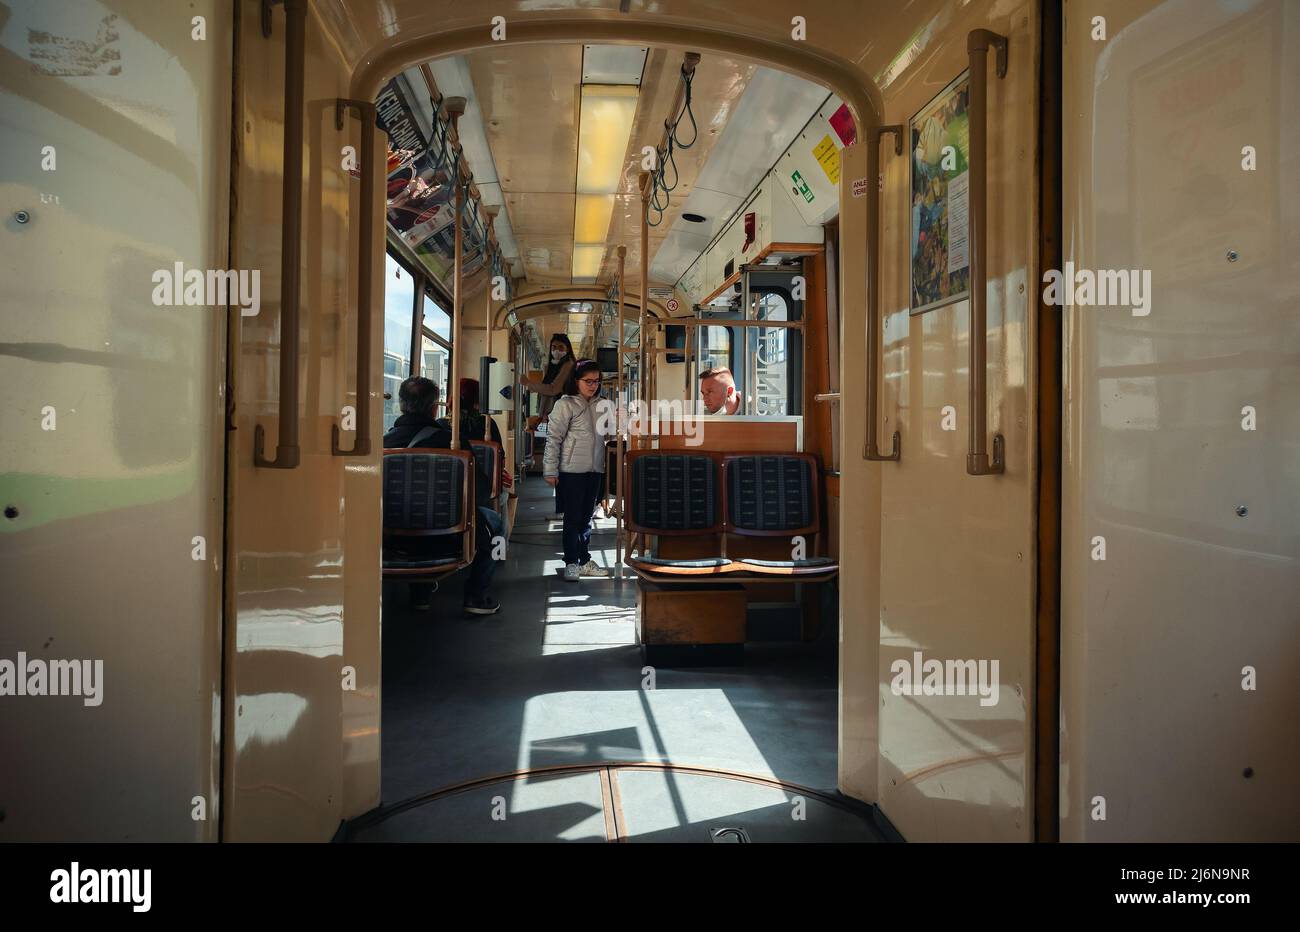 Graz, Austria - April 25, 2022: In the Tram from Graz while driving around the city. Stock Photo